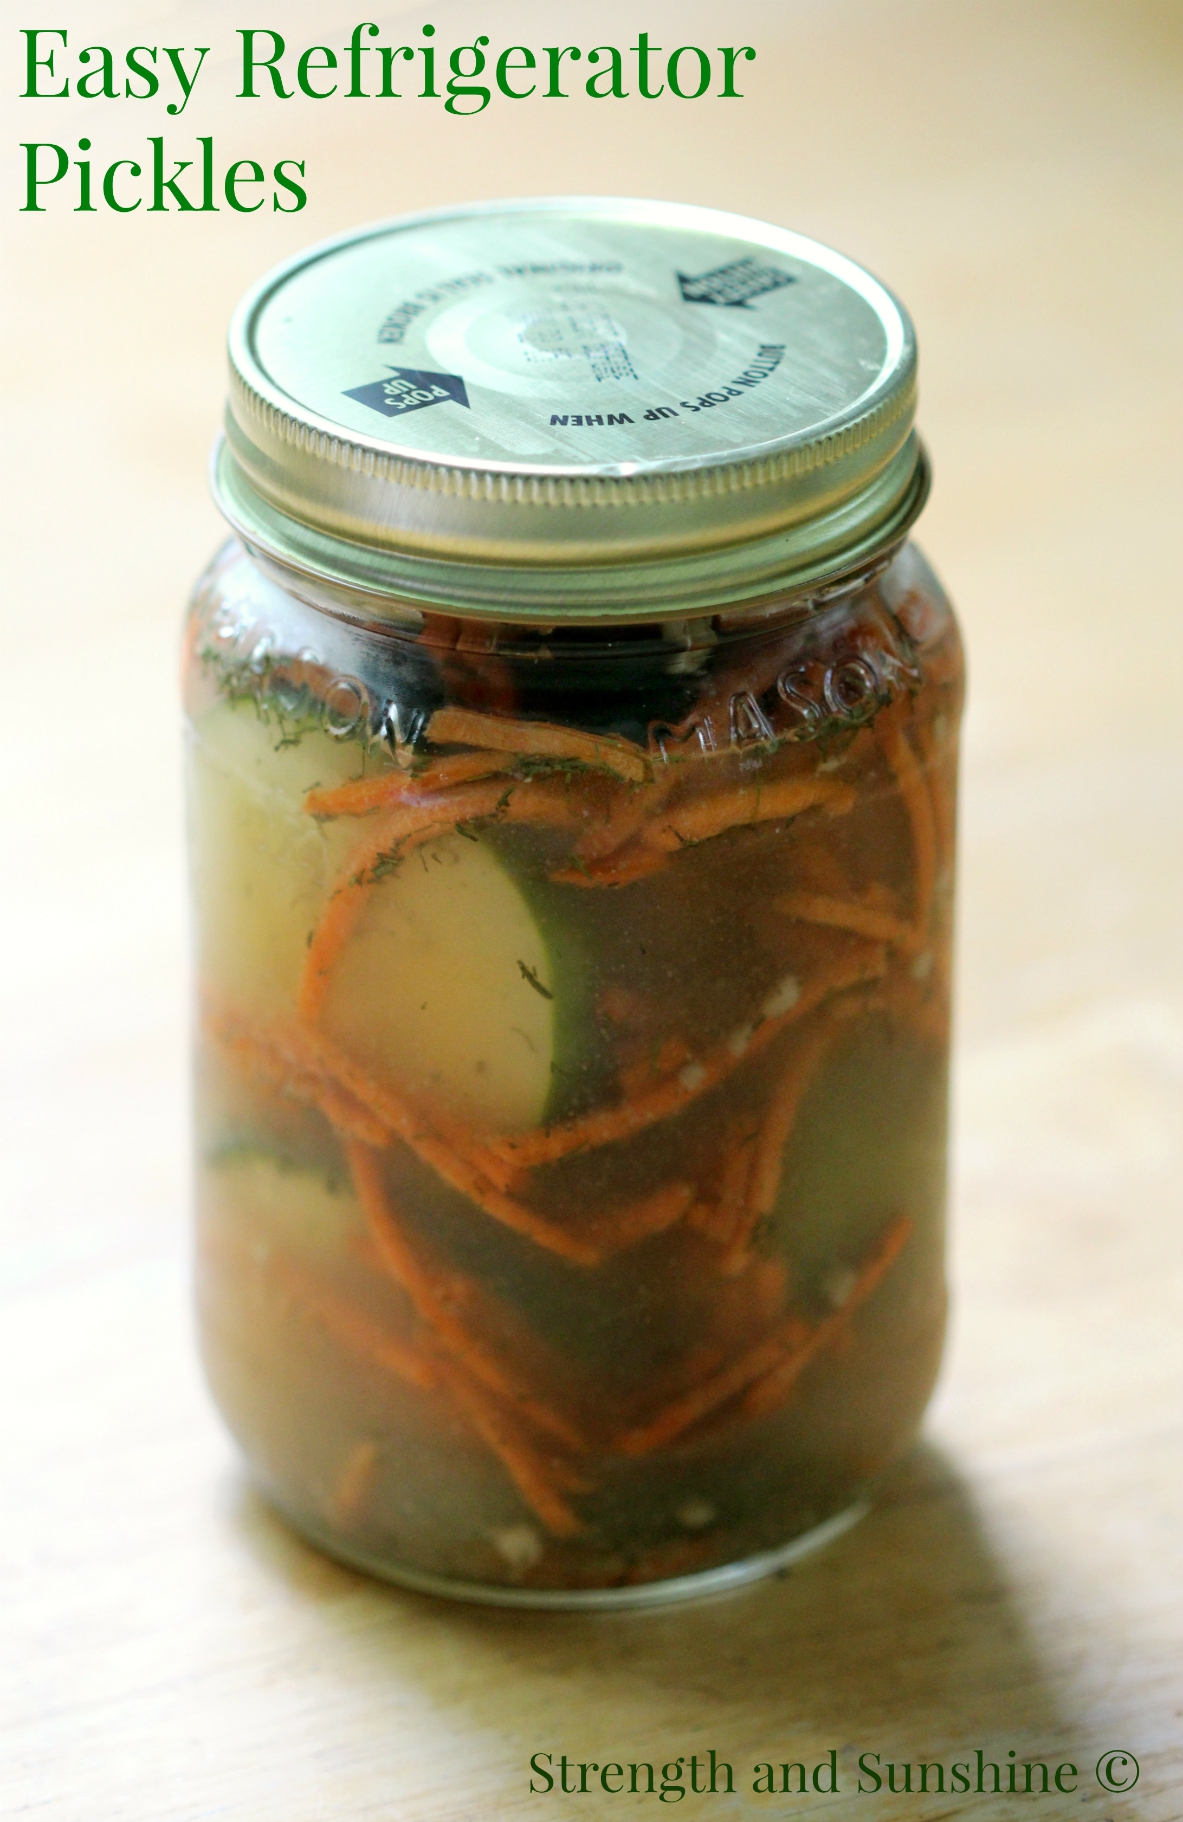 Easy Refrigerator Pickles | Strength and Sunshine @RebeccaGF666 Take the last of your summer cucumbers and make some easy refrigerator pickles. A quick way to take extra cucumbers from boring to totally snack worthy! Gluten-free, healthy, vegan, paleo, and allergy-friendly; even salt and sugar free!